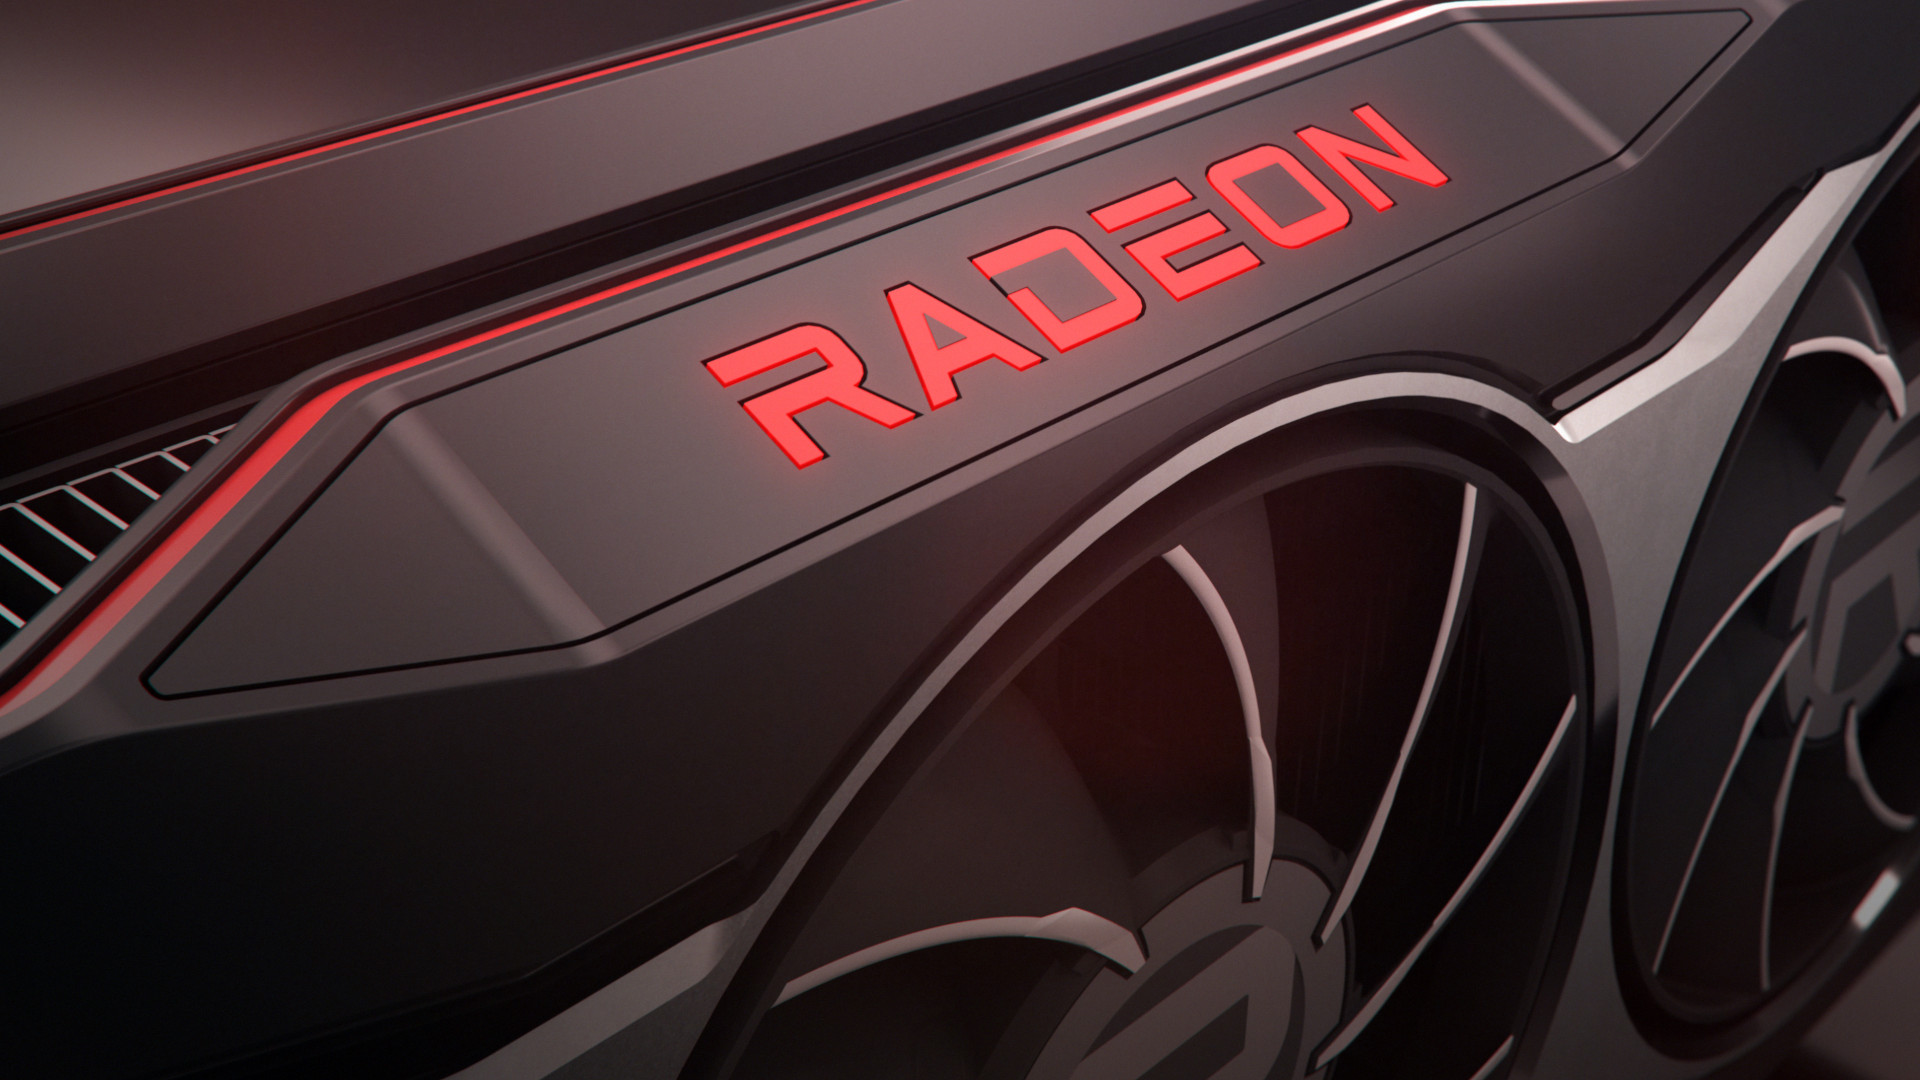 AMD RDNA 3 release date may play catch-up to RTX 4000 GPUs